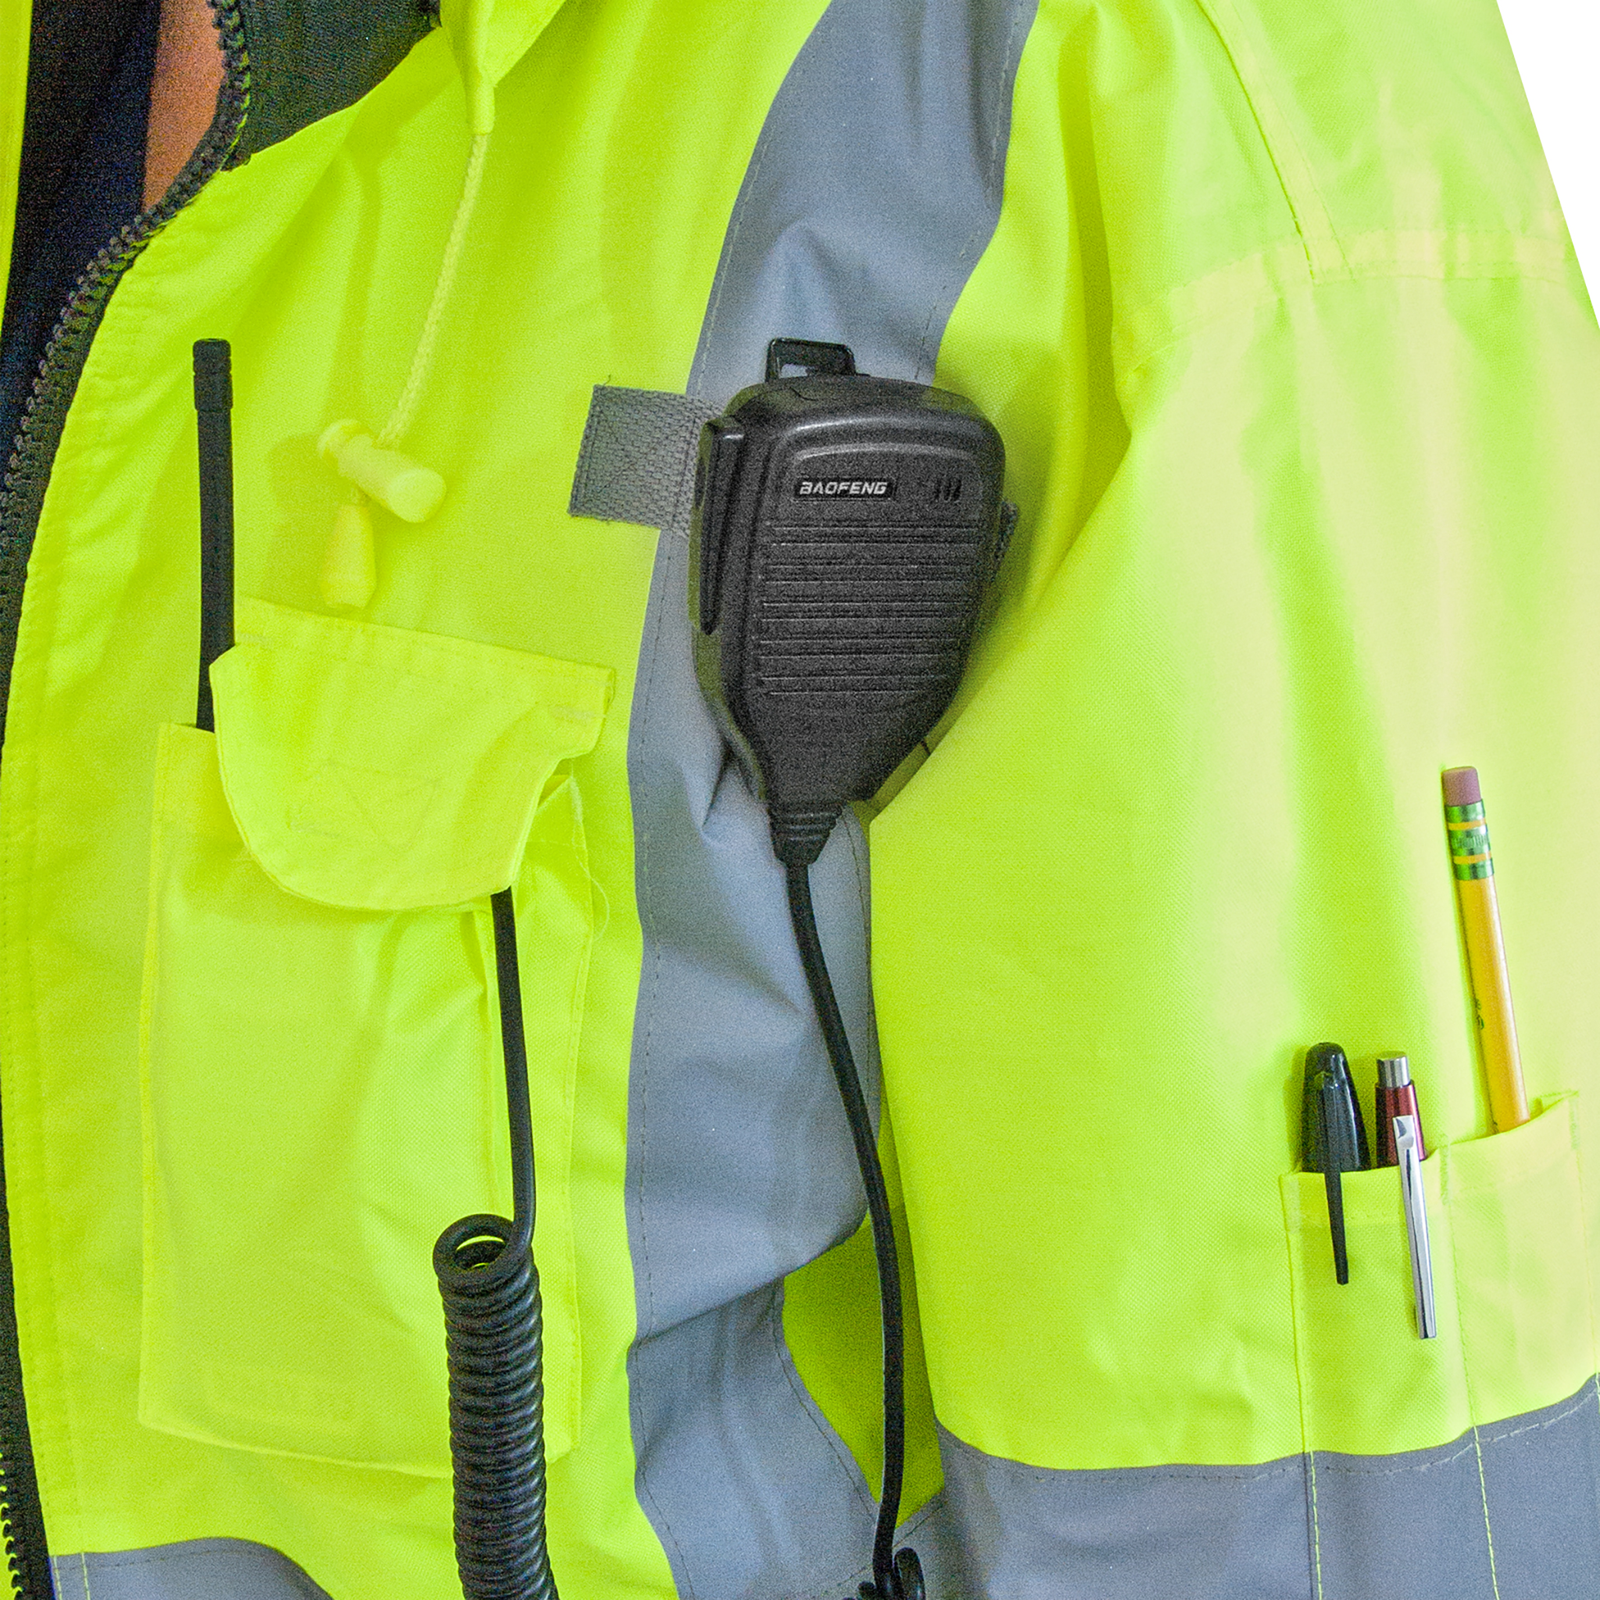 Close up showing the chst pocket and the radio tap of the JORESTECH safety jacket